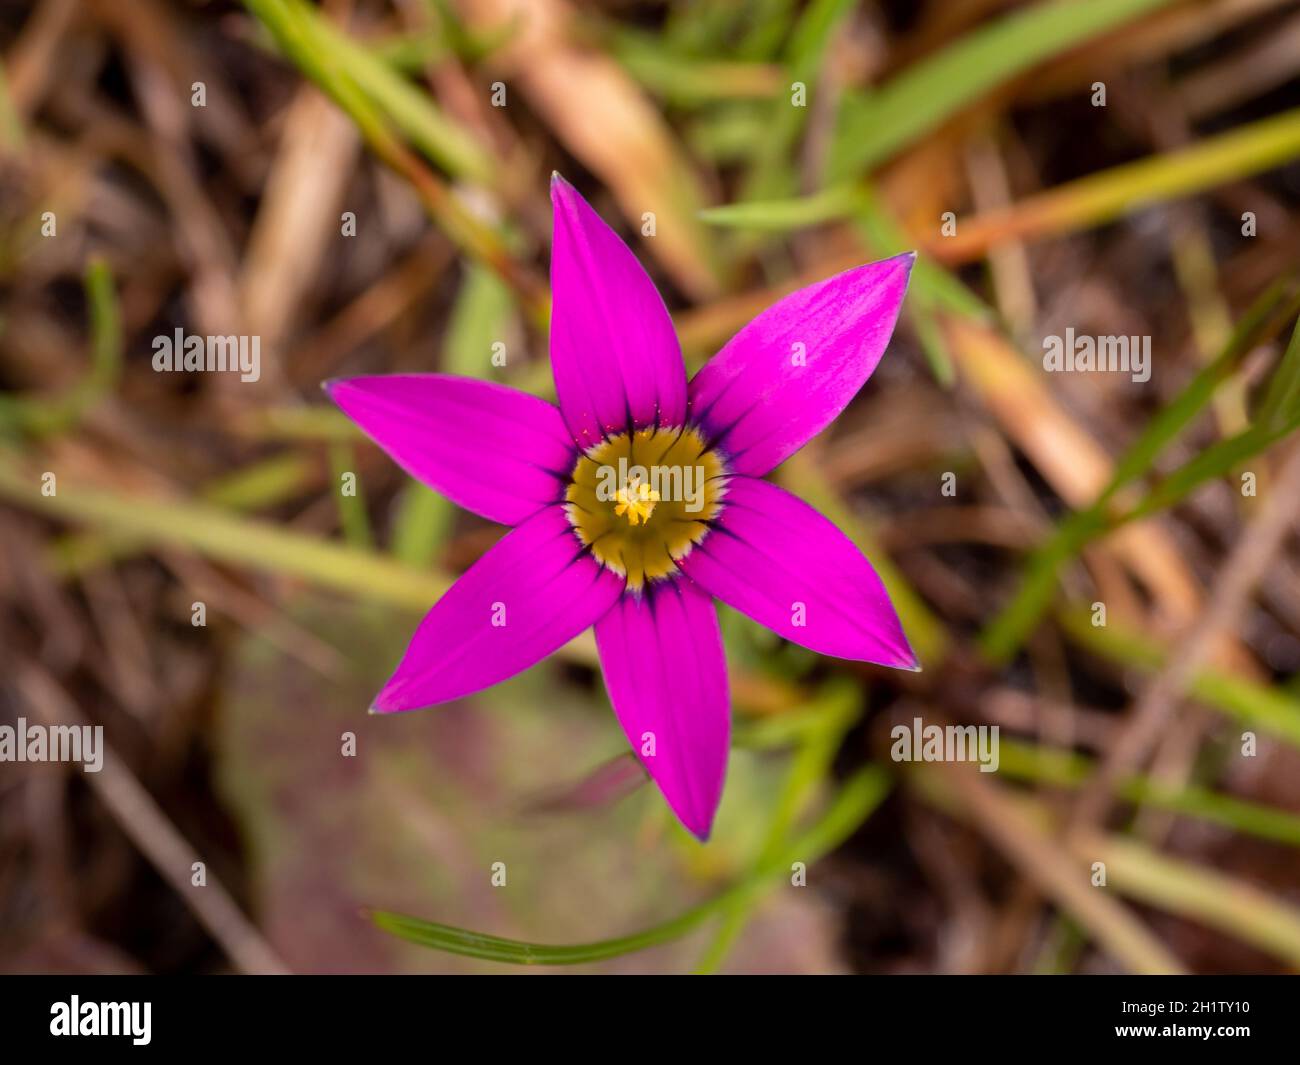 The bright pink flower of Romulea rosea (Onion Grass) which is considered a weed in Australia where the plant was photographed. Stock Photo